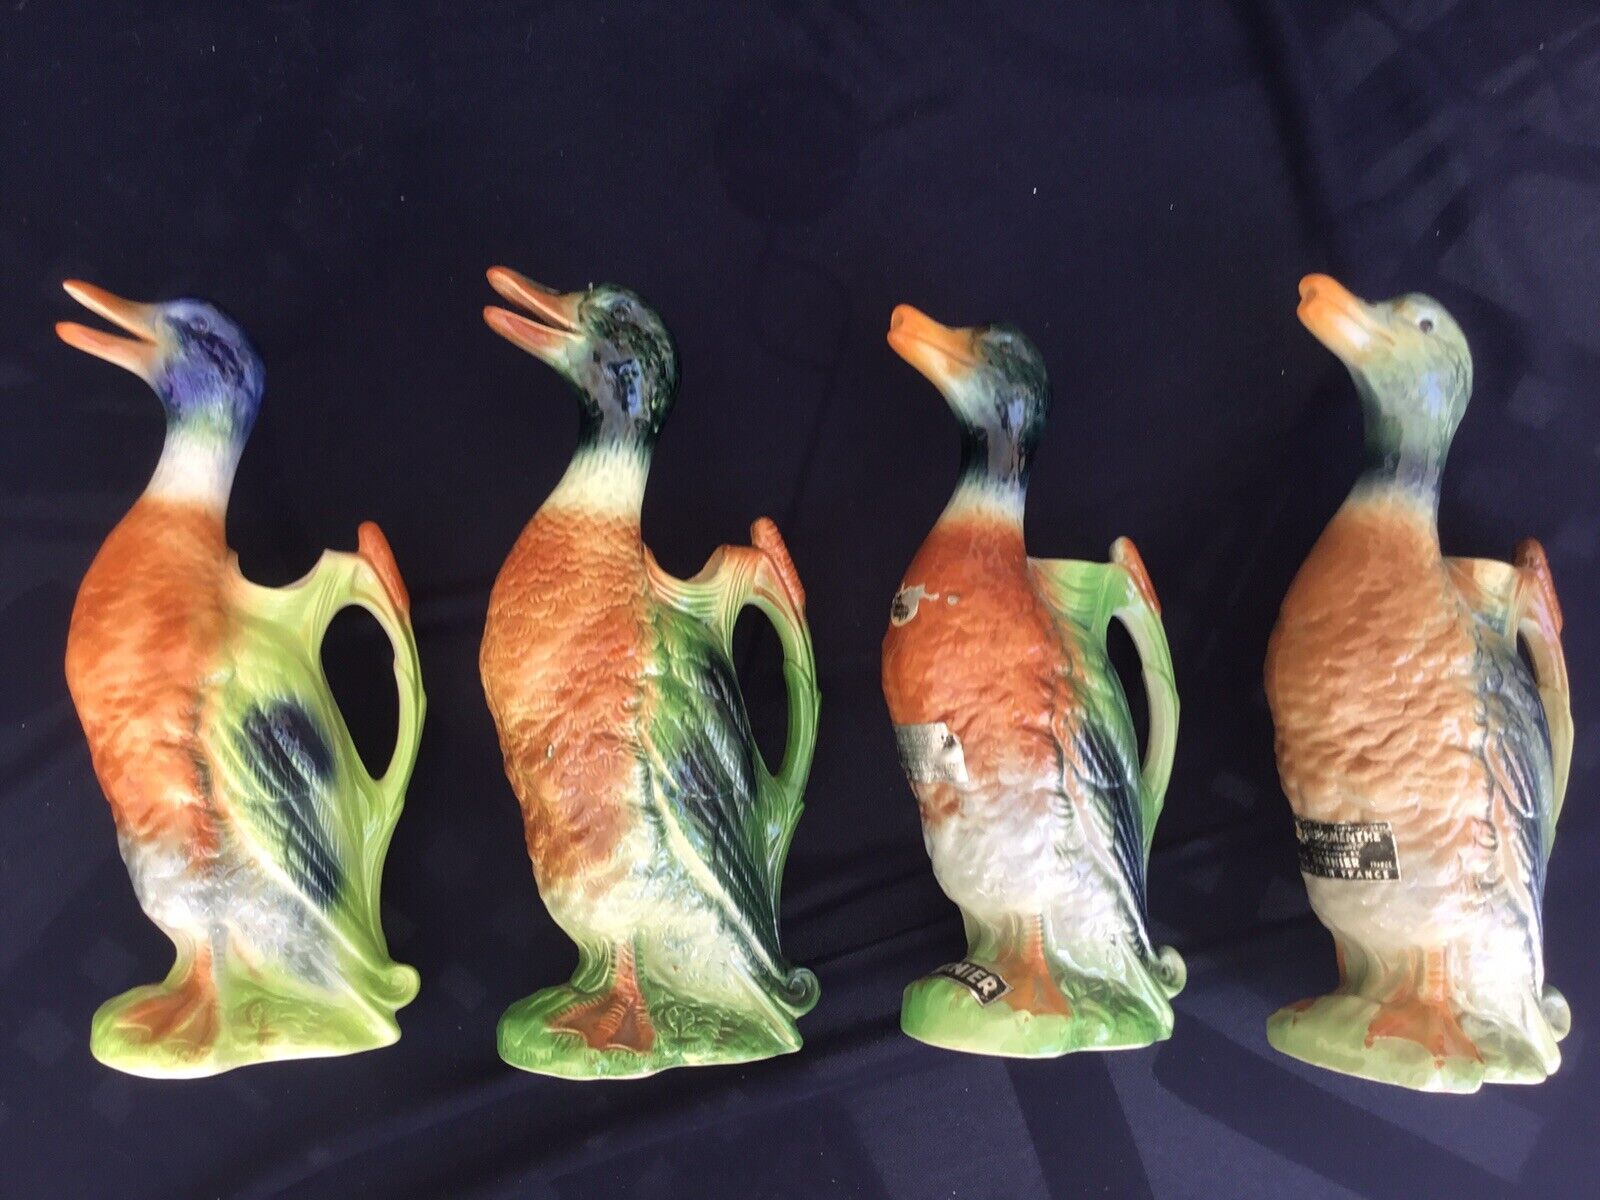 Antique- Vintage Set of French Majolica Duck Pitchers 1920s,1950s,1970s and 1990